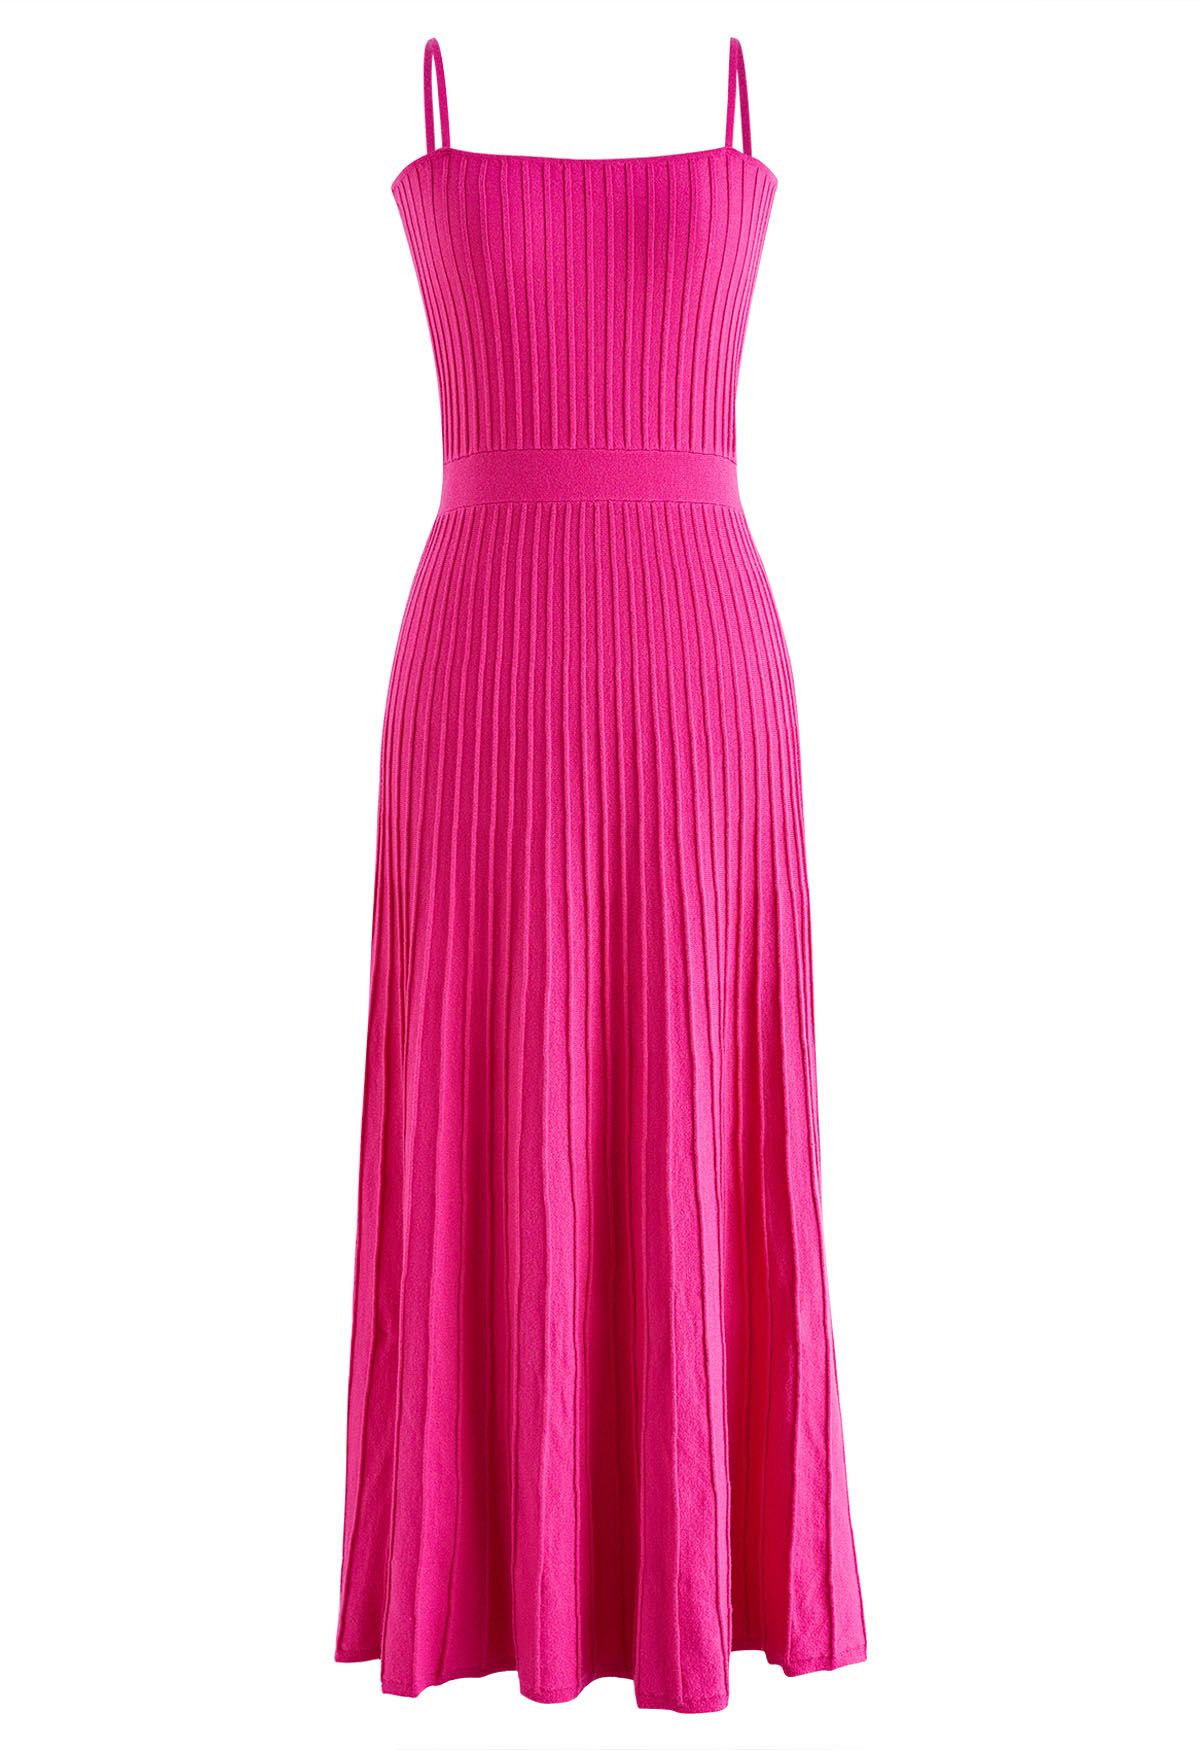 Solid Pleated Knit Cami Dress in Hot Pink